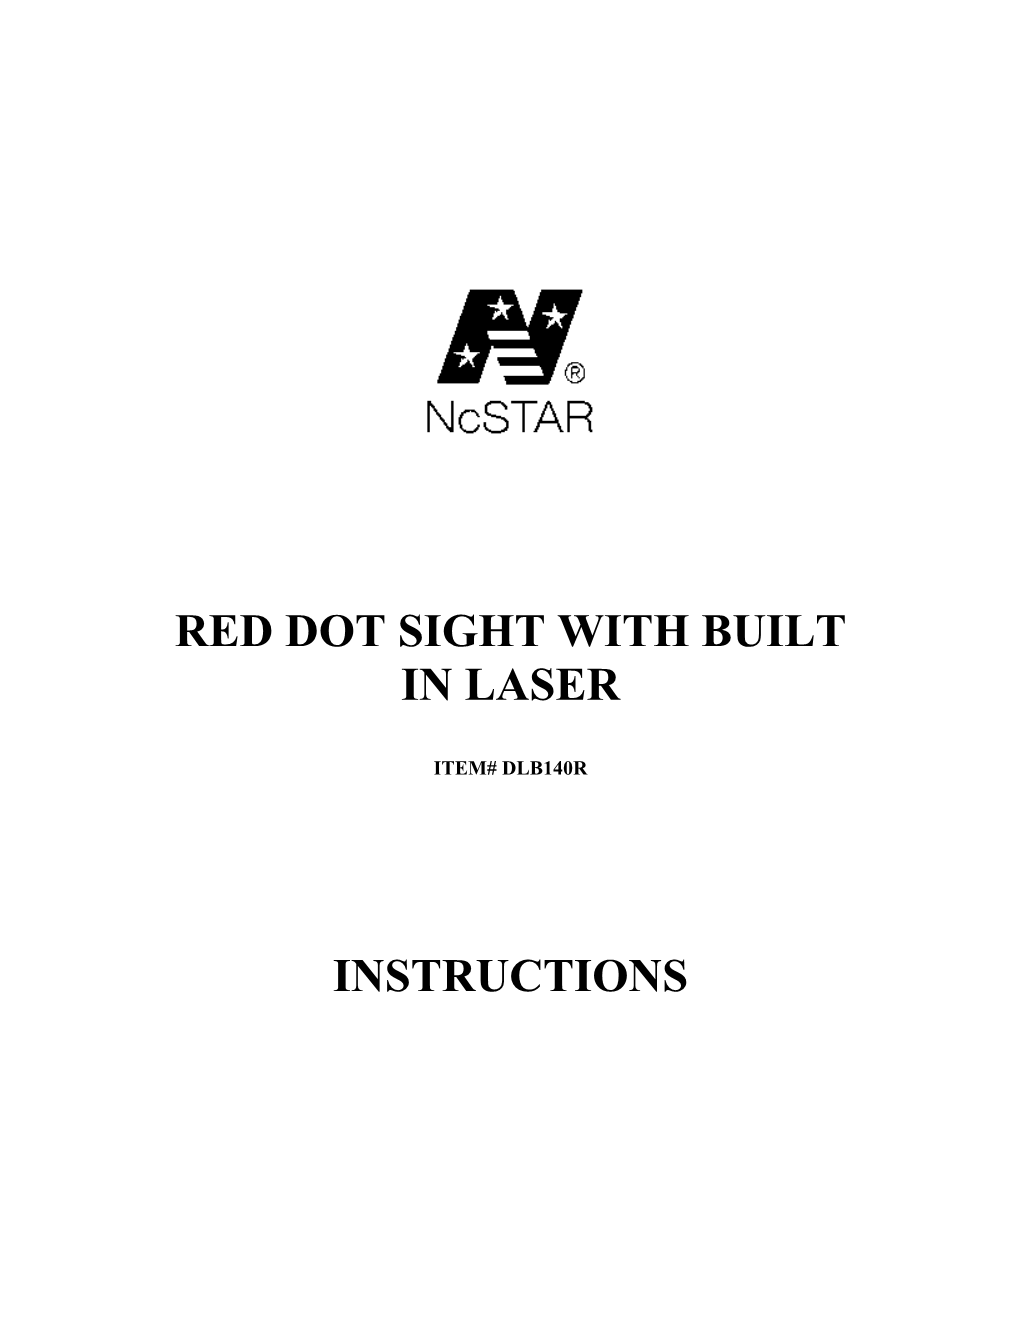 Red Dot Sight with Built in Laser Instructions